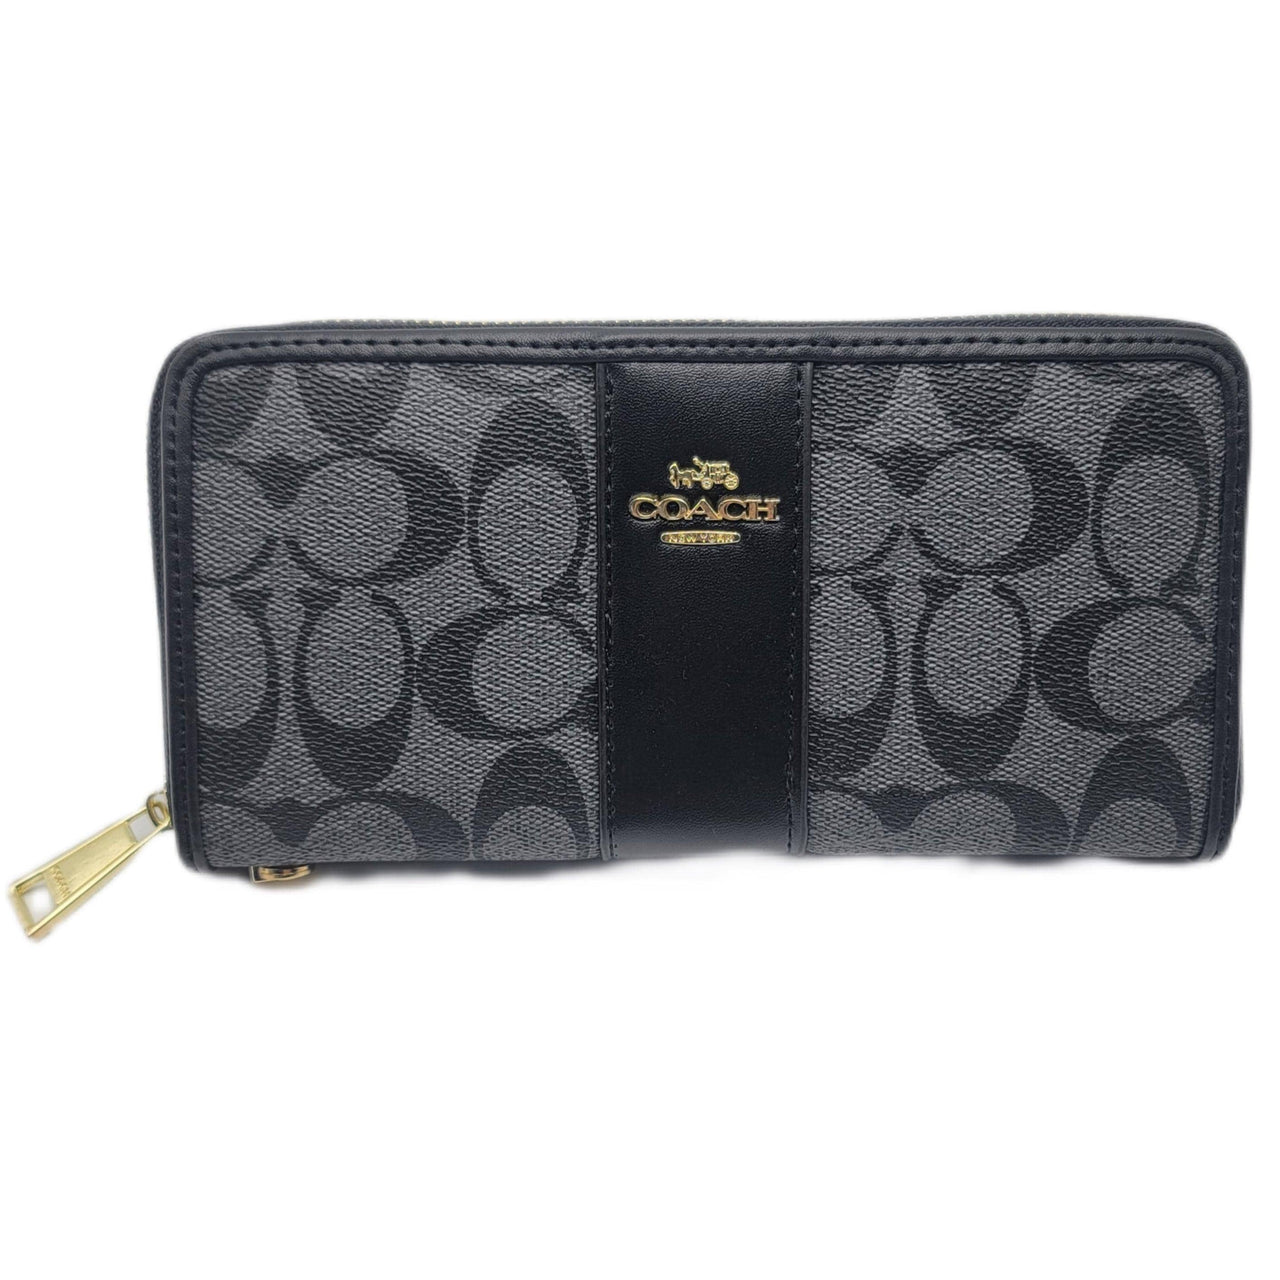 The Bag Couture Luggage & Bags Coach Zip Wallet Classic Black